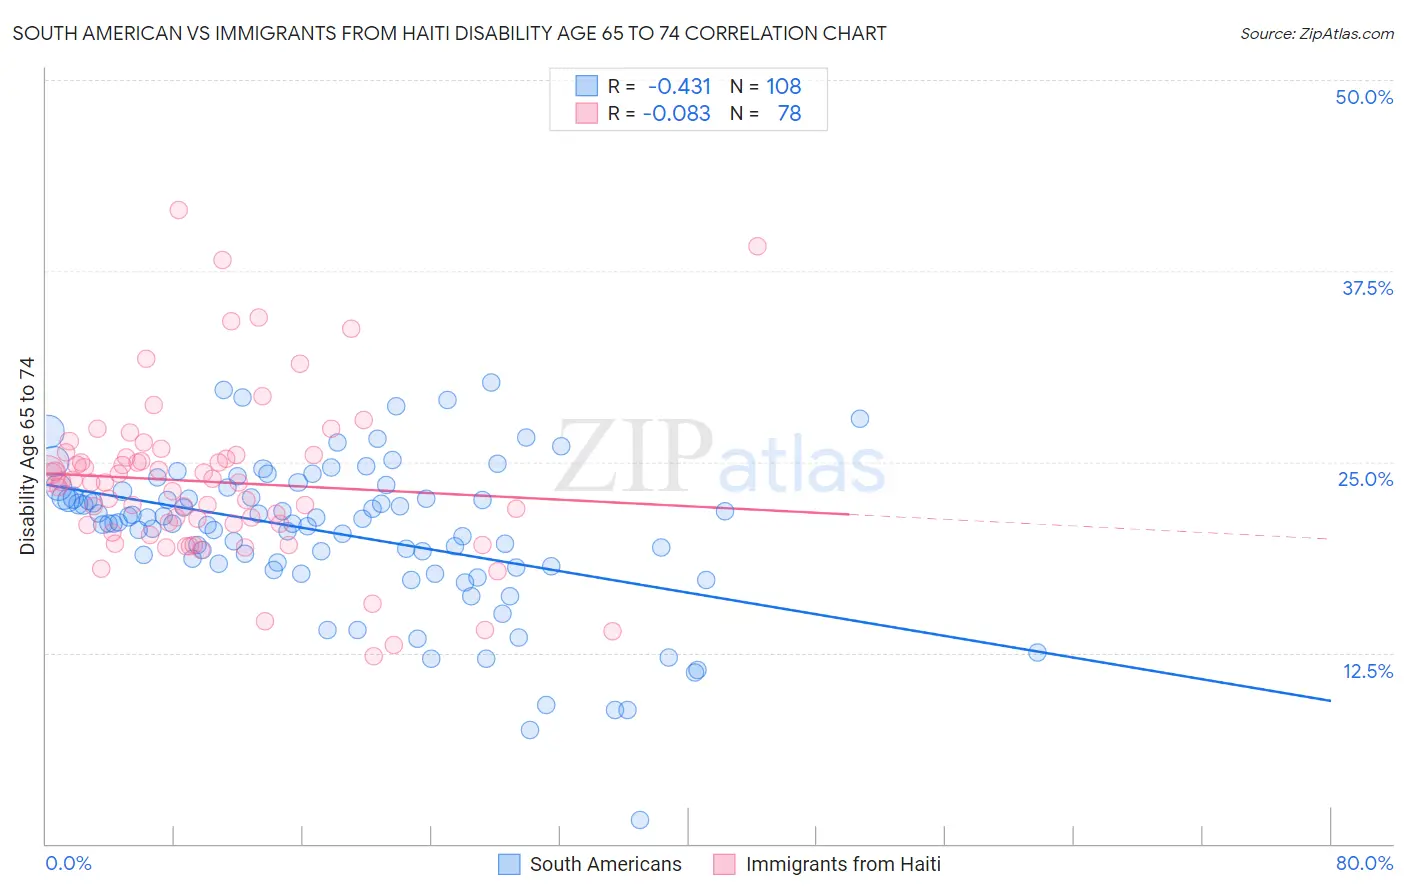 South American vs Immigrants from Haiti Disability Age 65 to 74